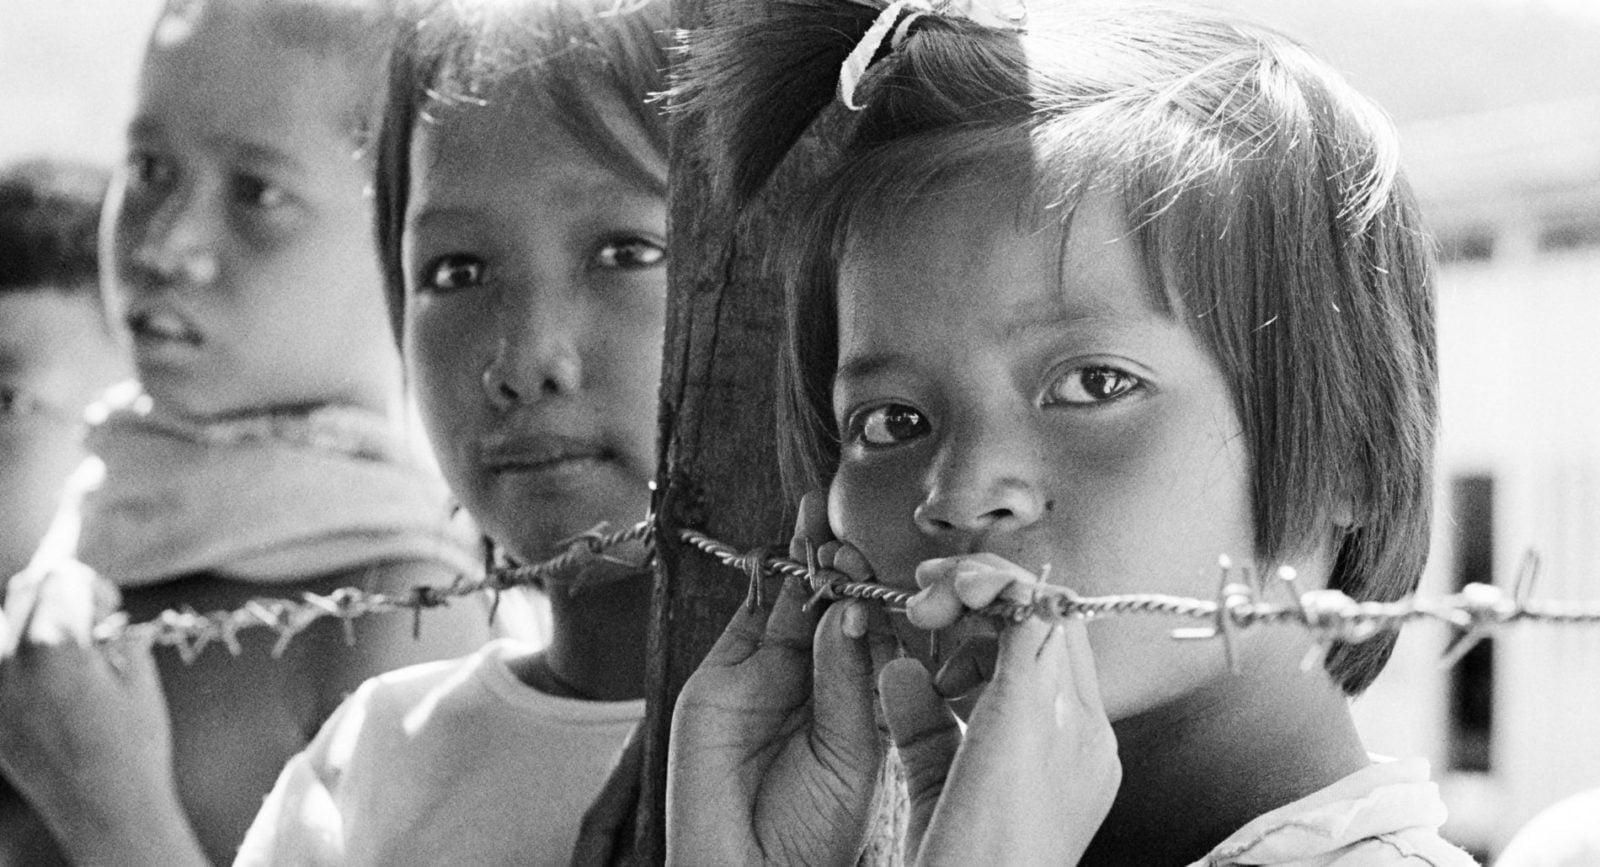 Three young refugees children leaning against barbed wire in South East Asia